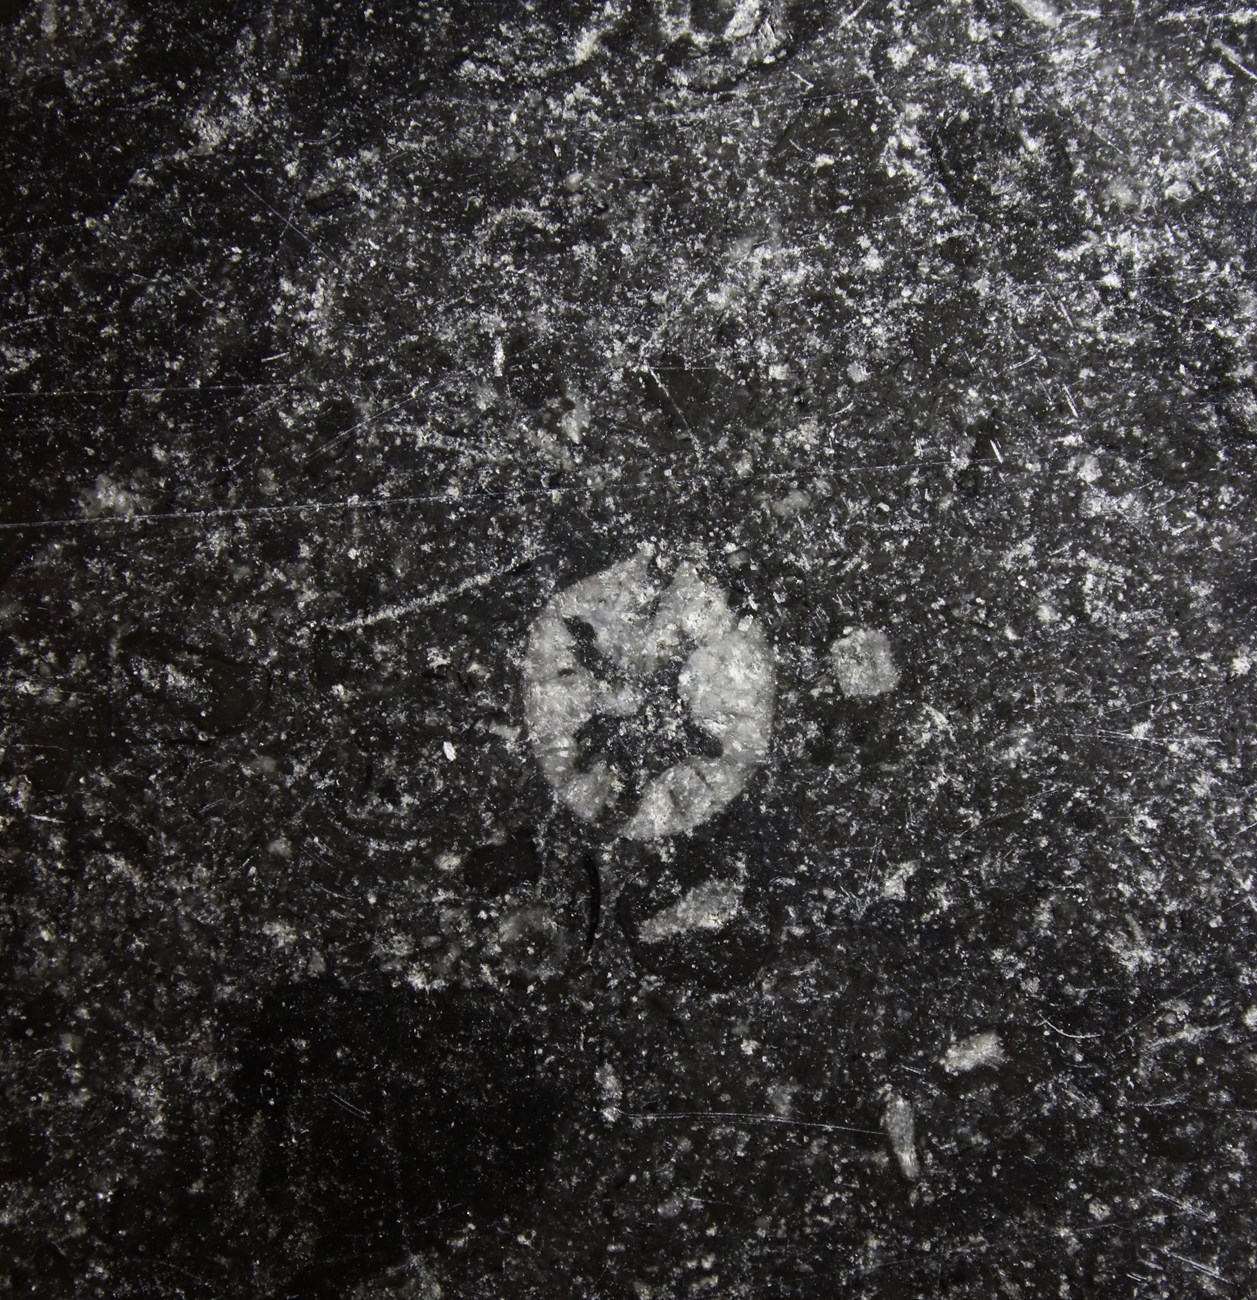 Crinoid stems are small columnar pieces with star-shaped holes